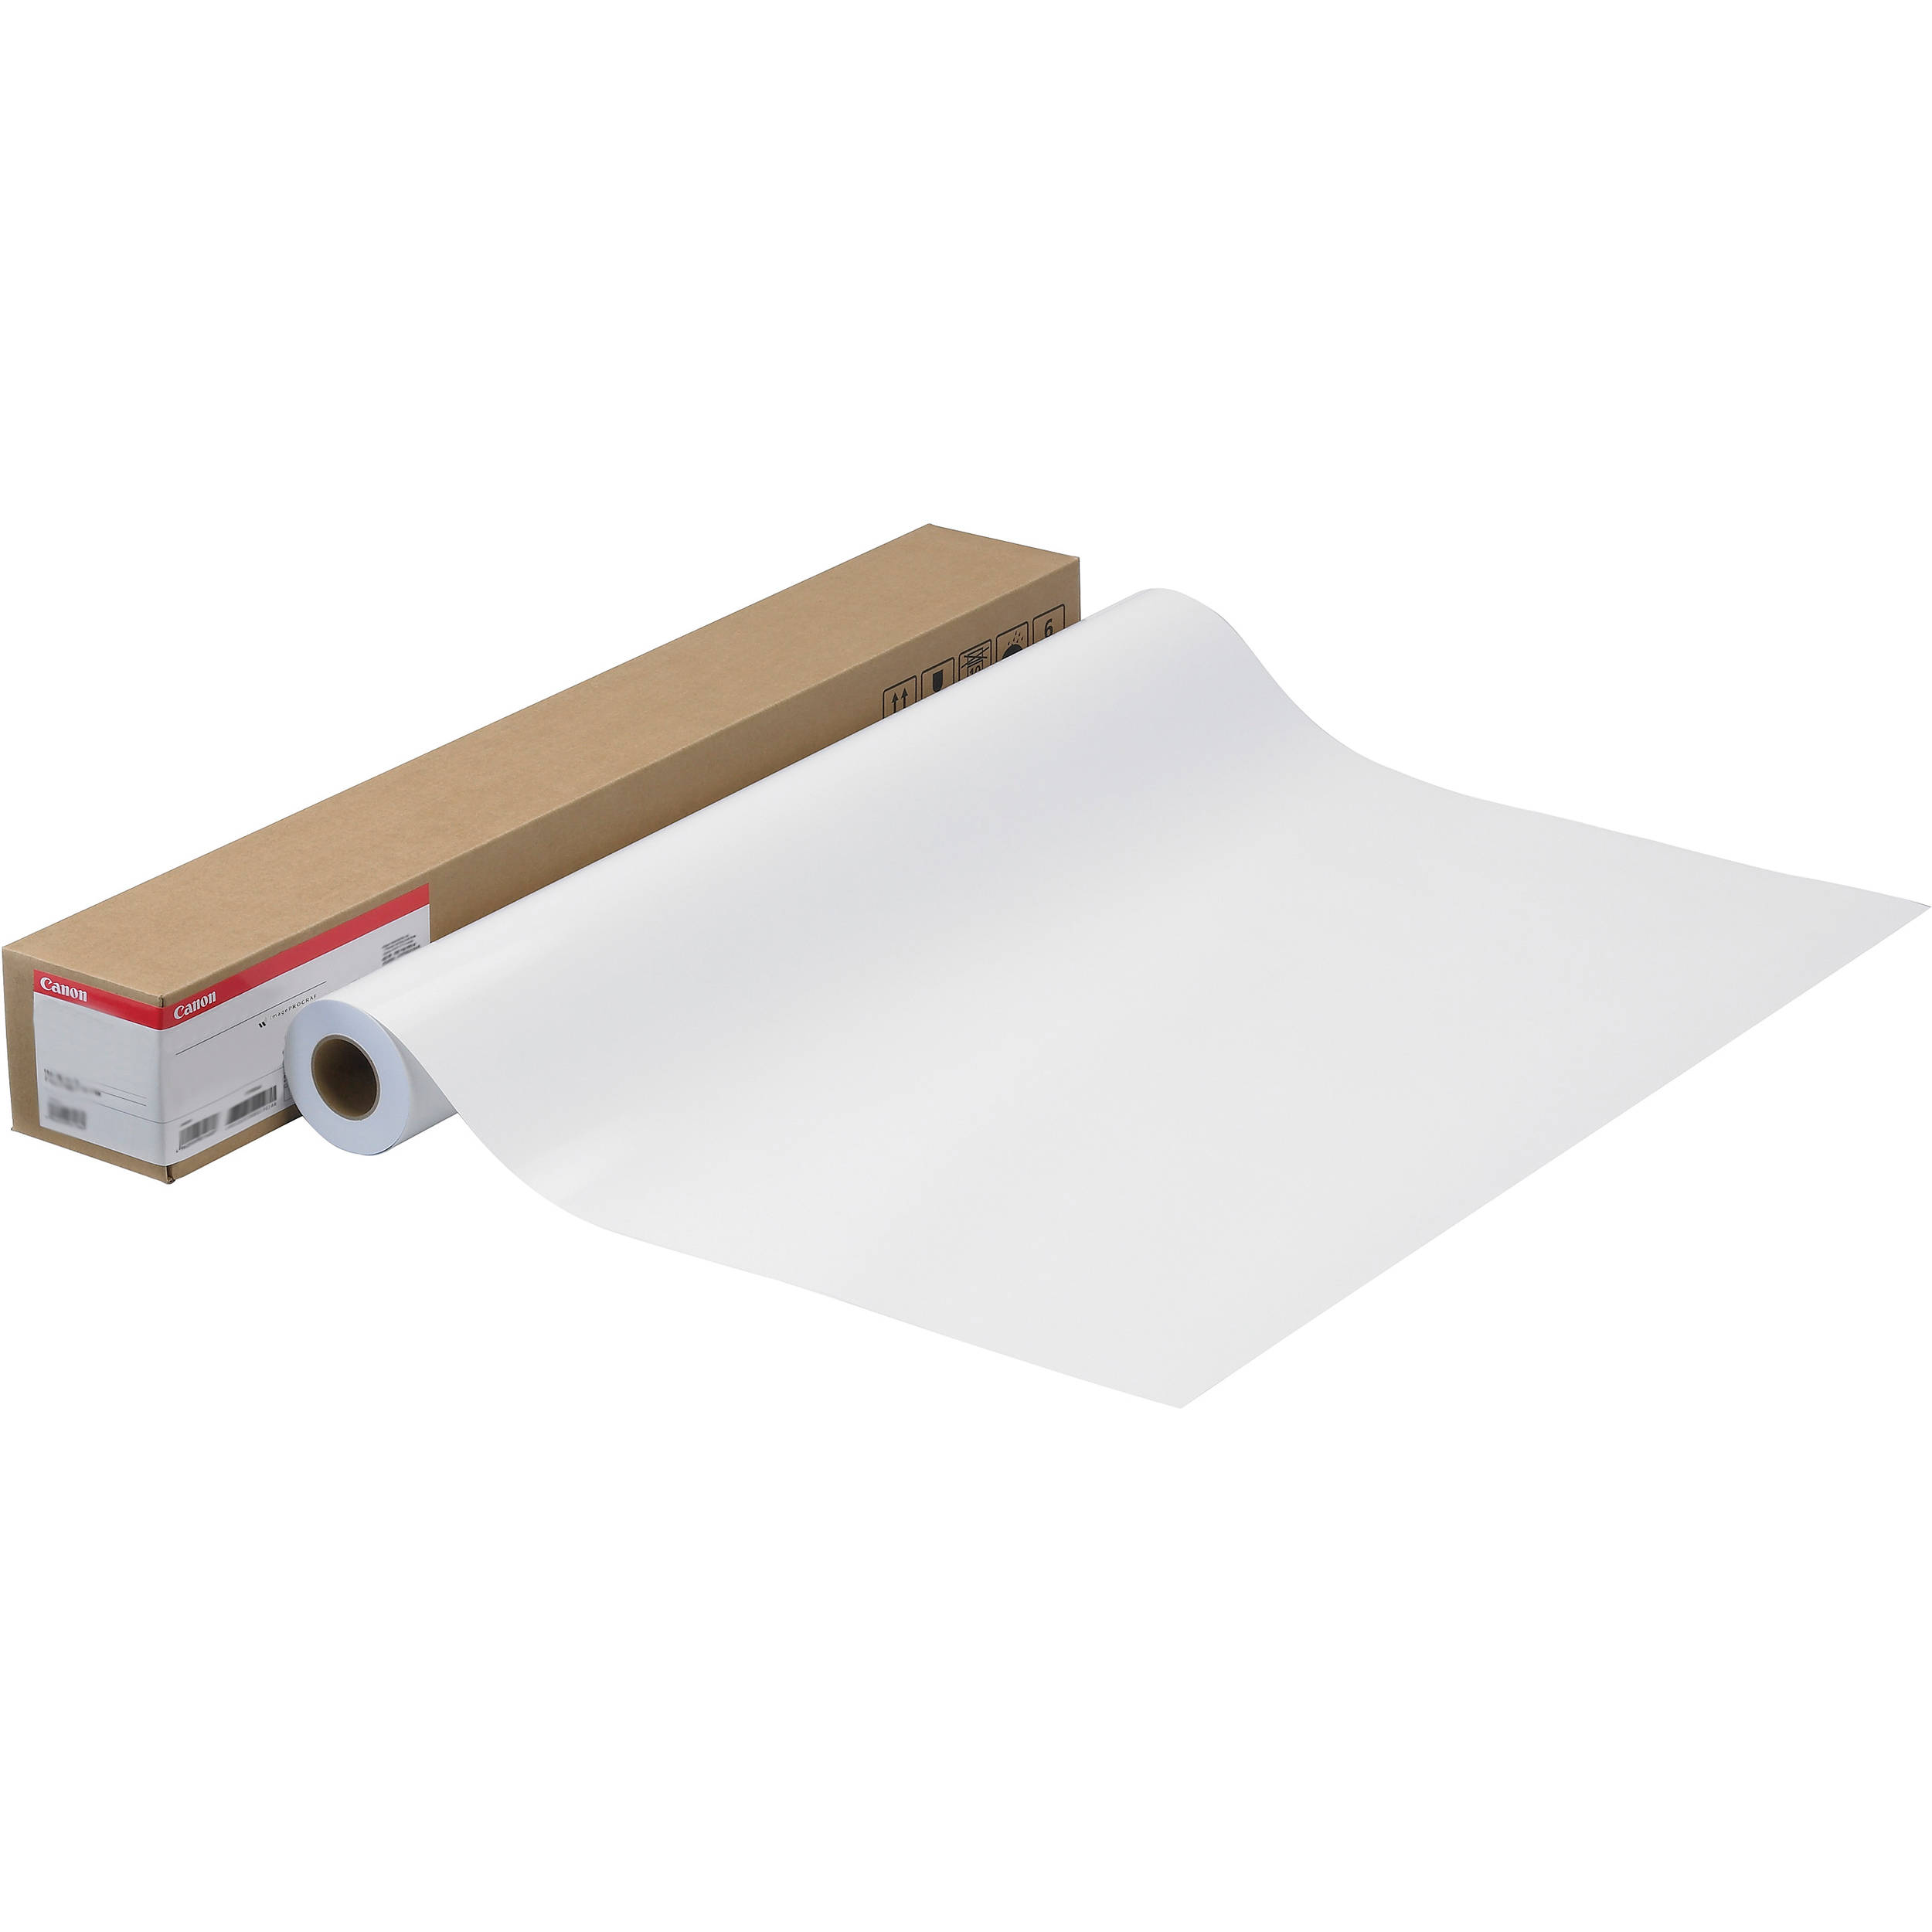 Canon Premium RC Photo Luster Paper (255gsm) for Inkjet - 60" Wide x 100' Long